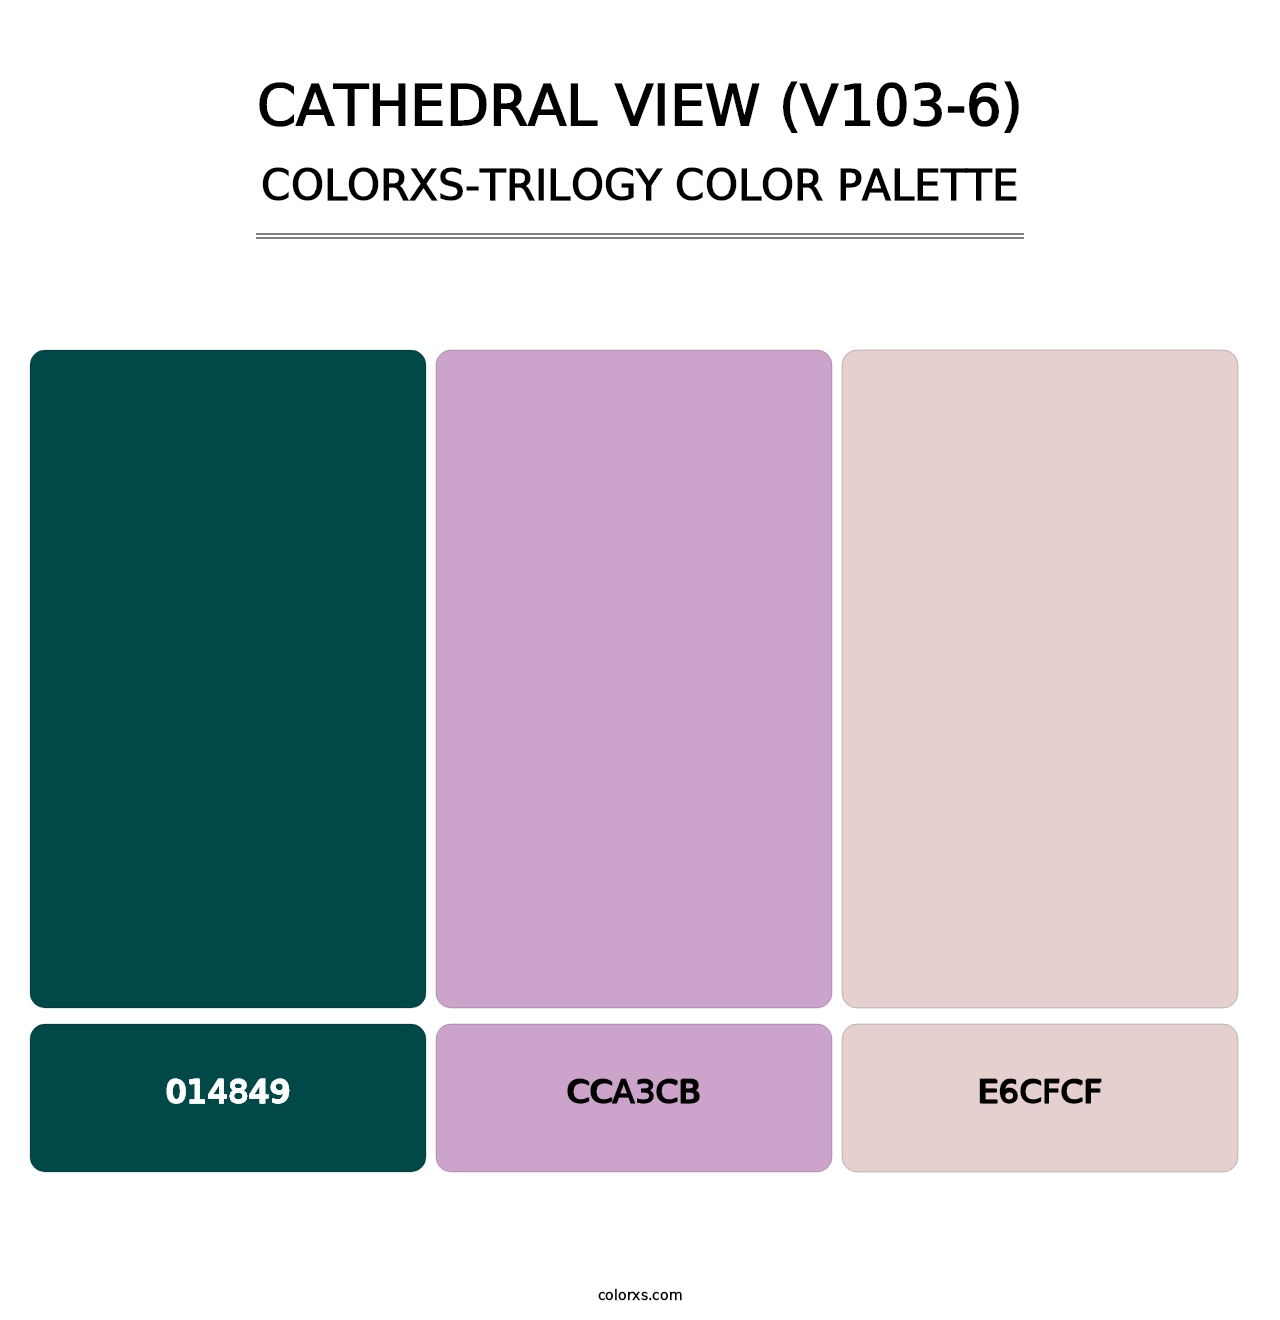 Cathedral View (V103-6) - Colorxs Trilogy Palette